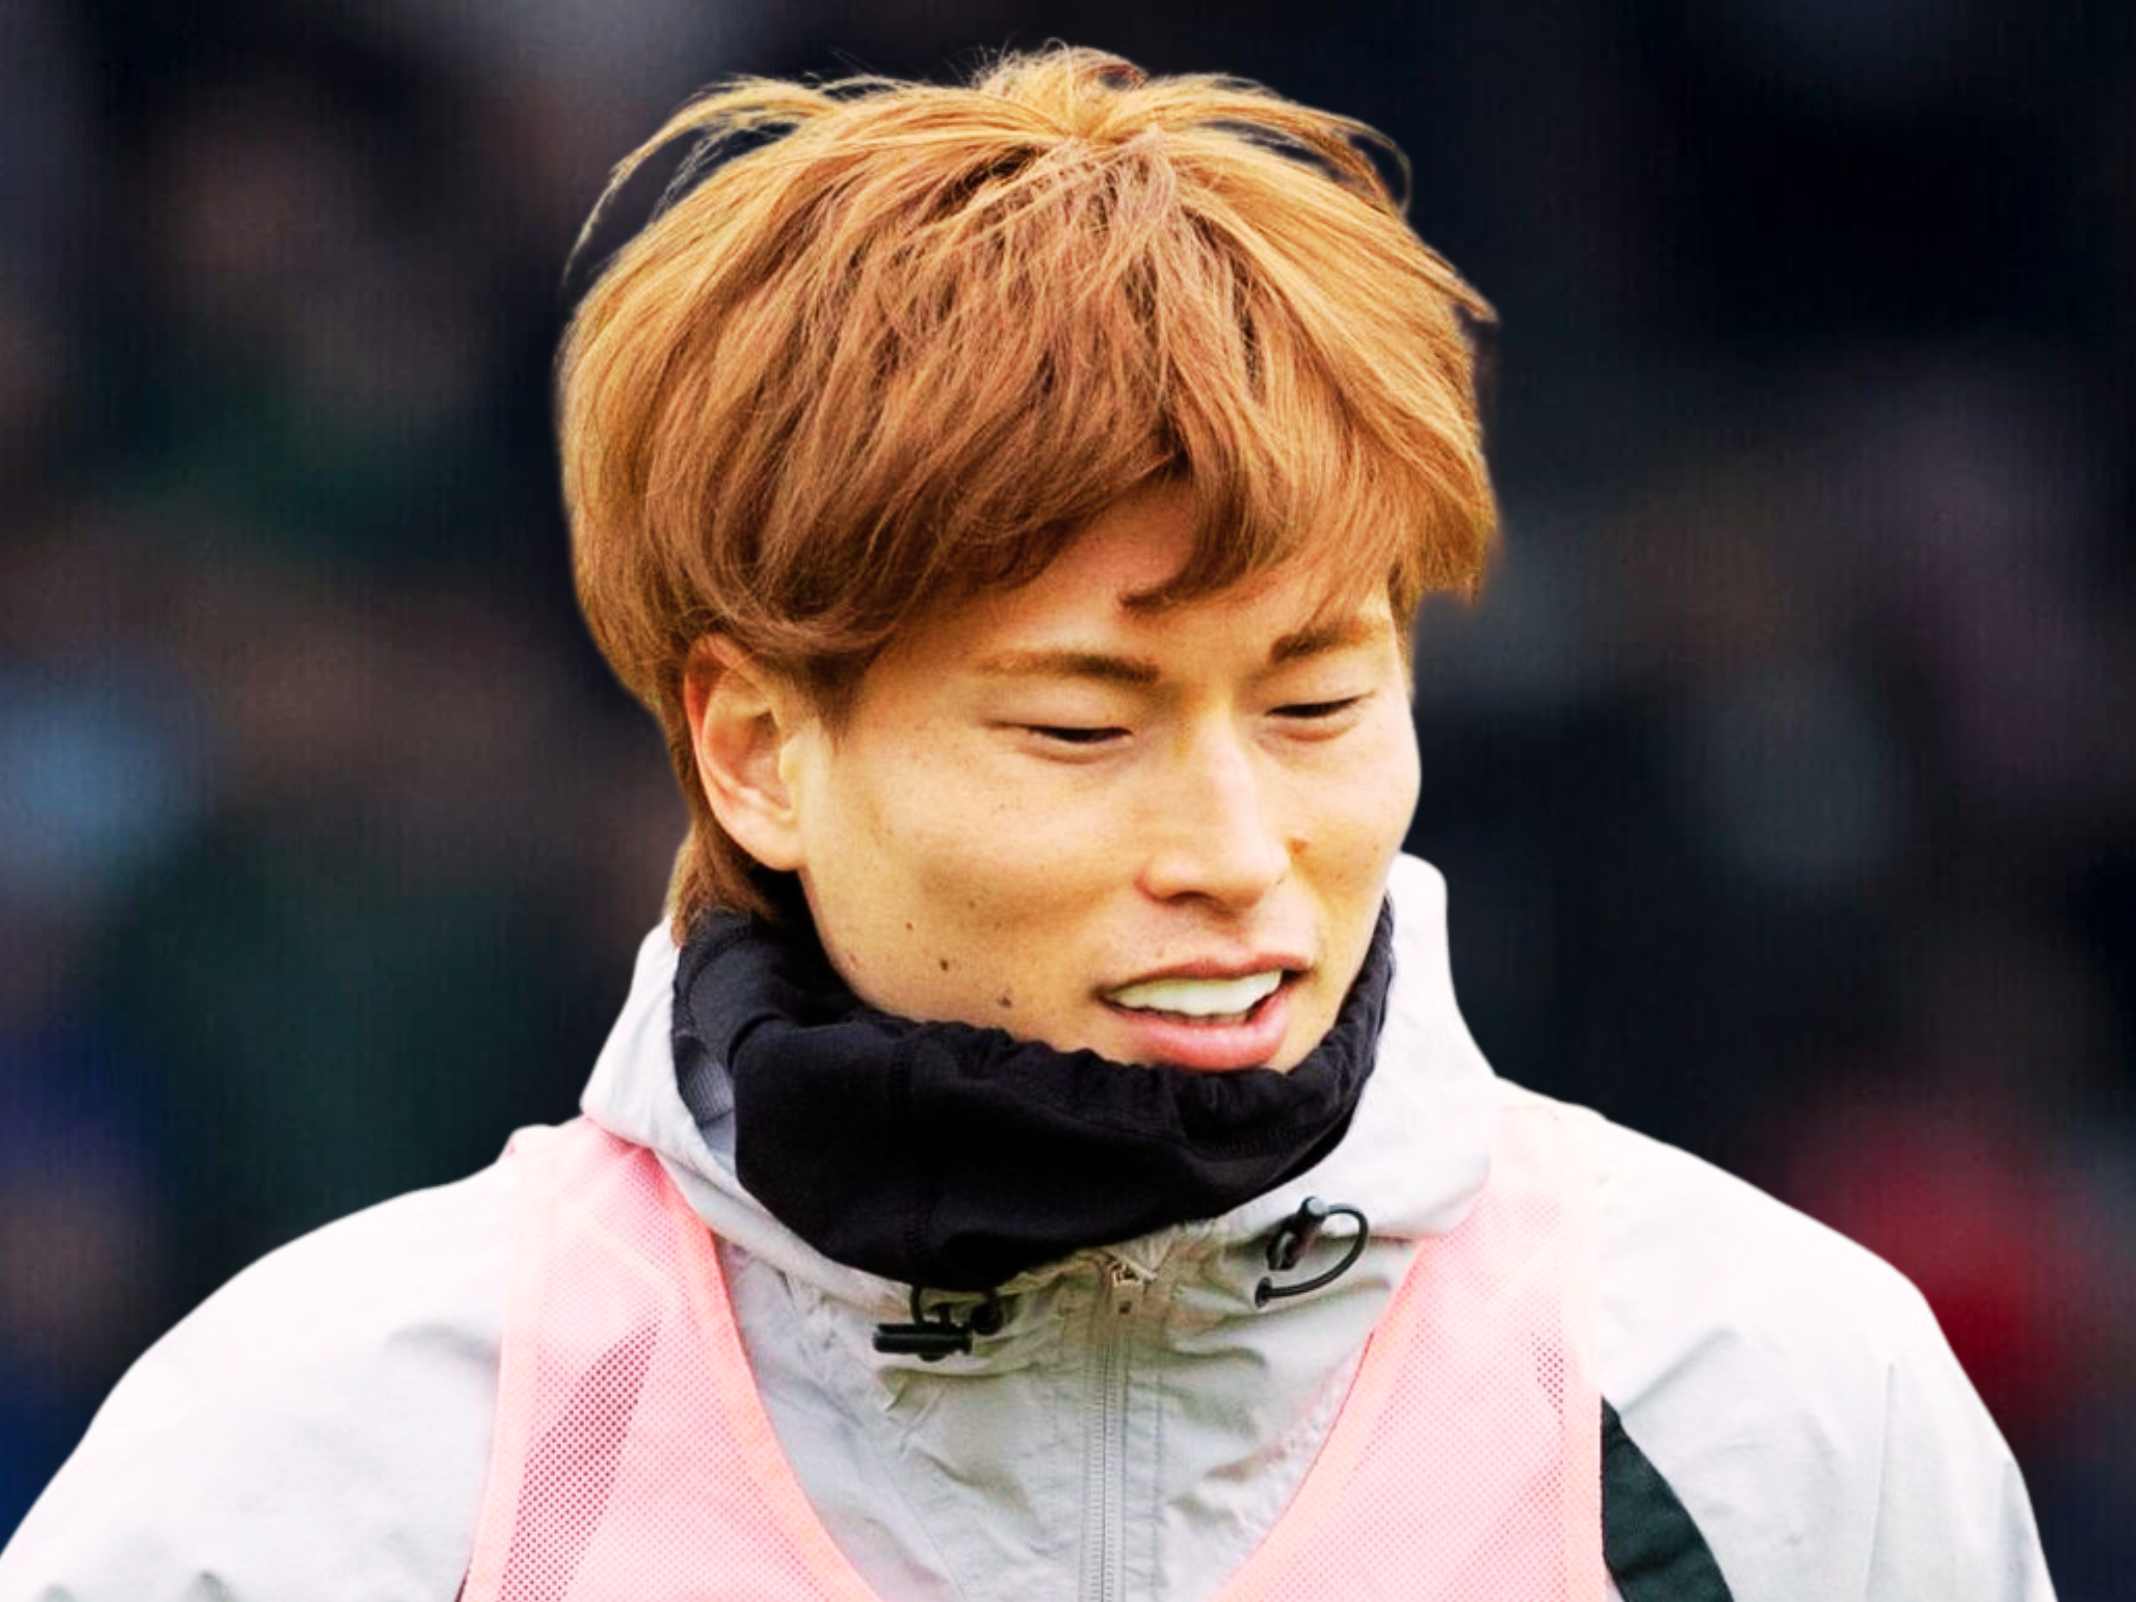 Has Celtic Star Kyogo Furuhashi Gotten New Teeth? Here’s What We Know